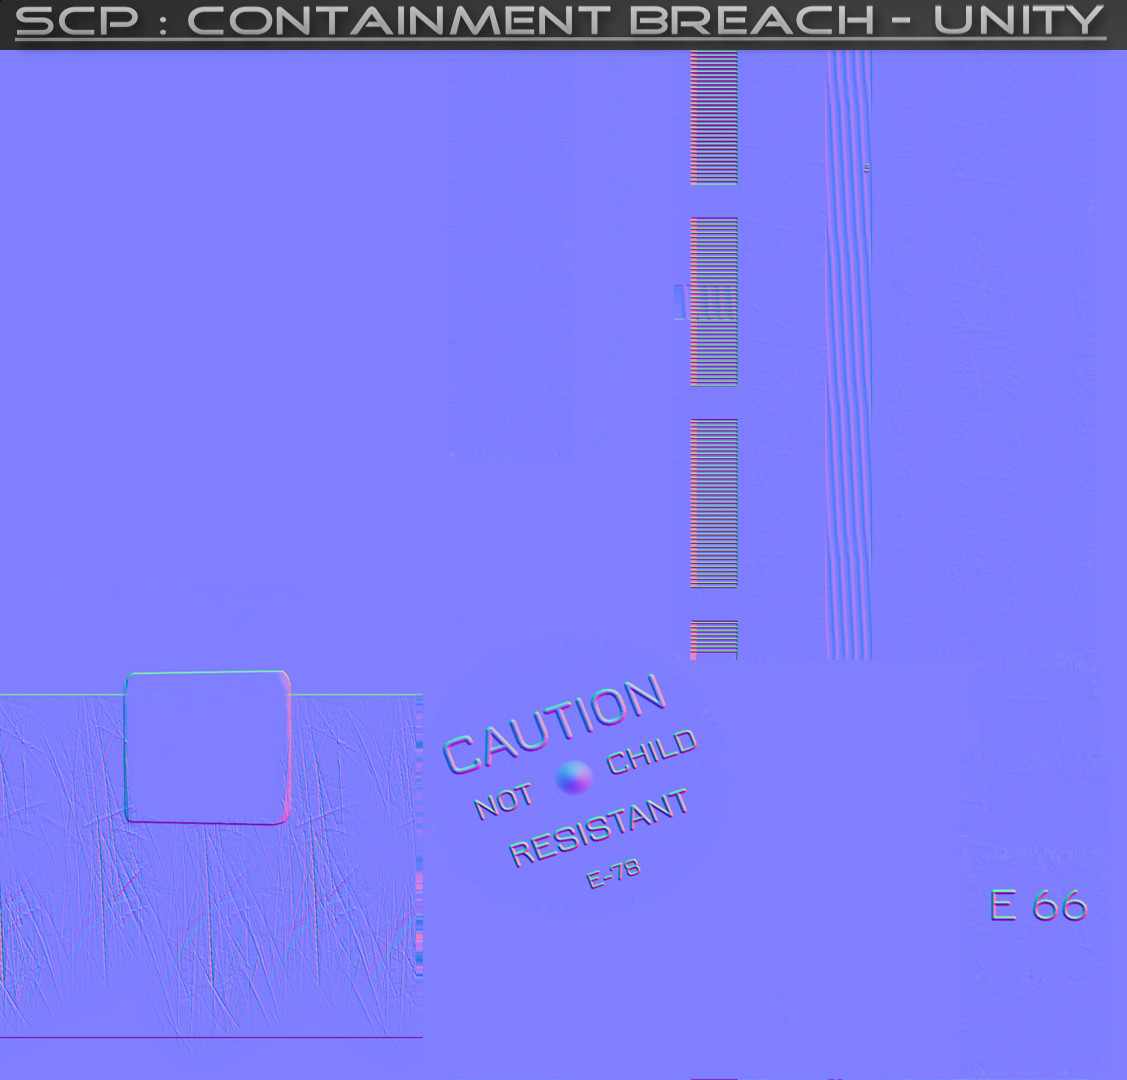 Aidan Eldred - Secure, Contain, Protect: Containment Breach - Unity